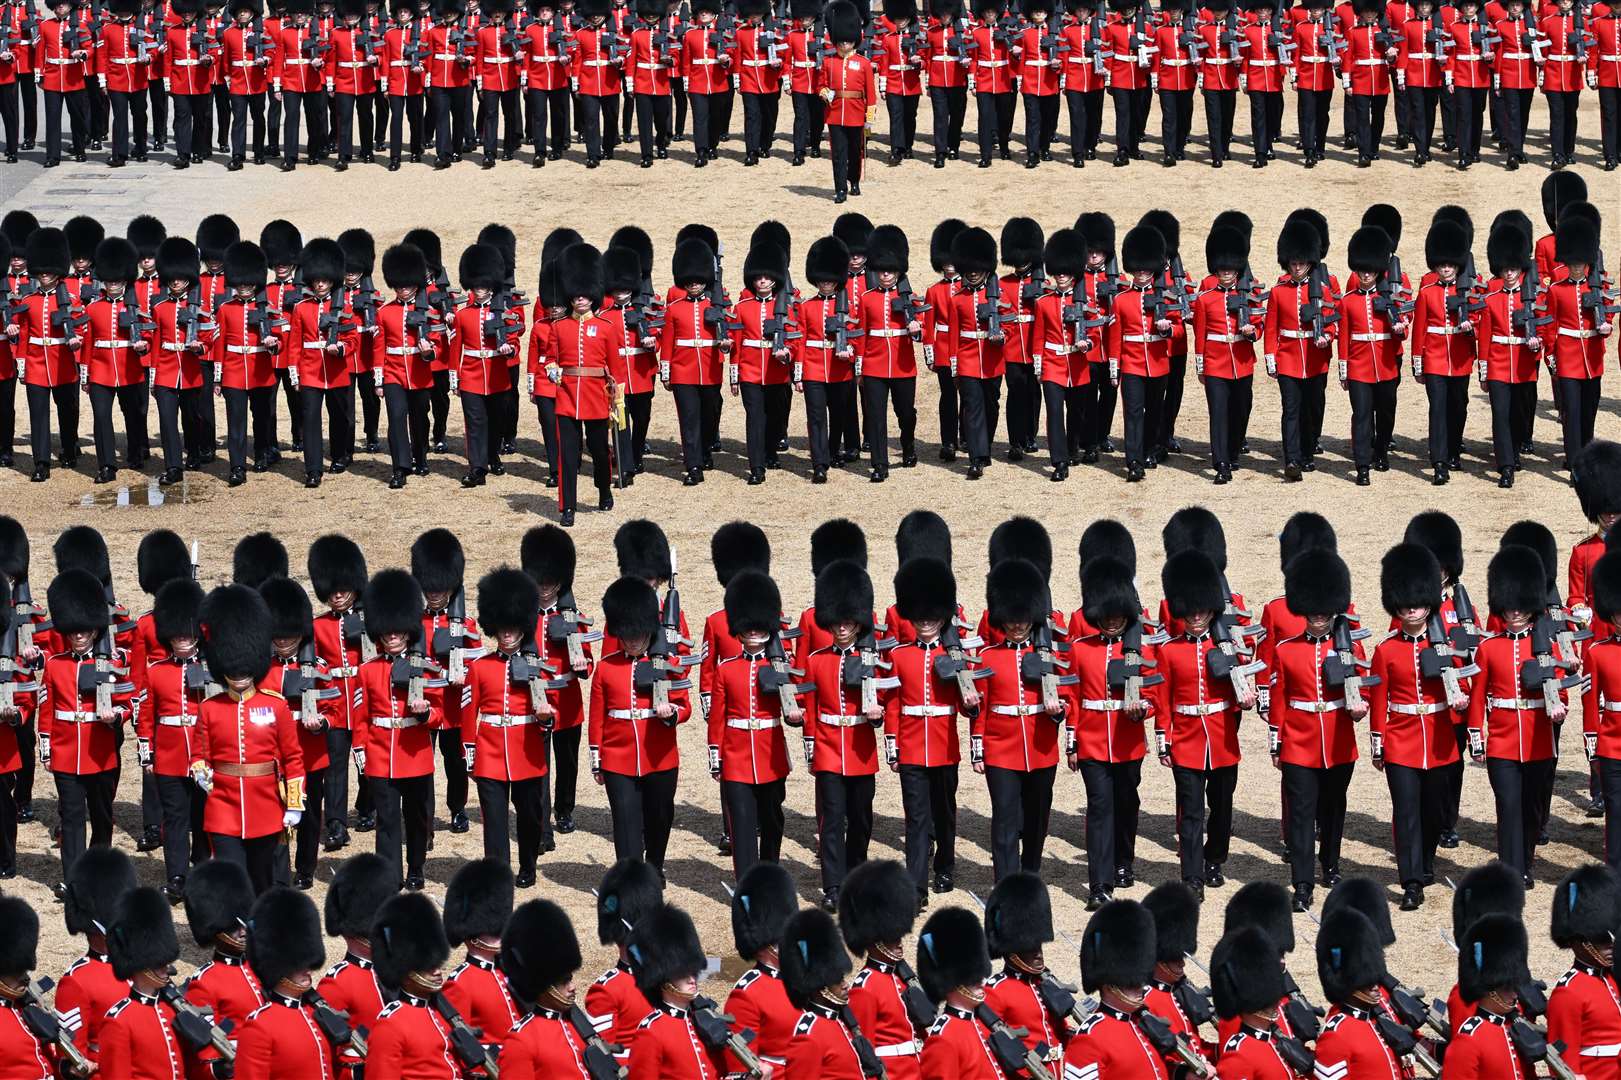 Members of the Household division during the Trooping the Colour ceremony (Jeff J Mitchell/PA)